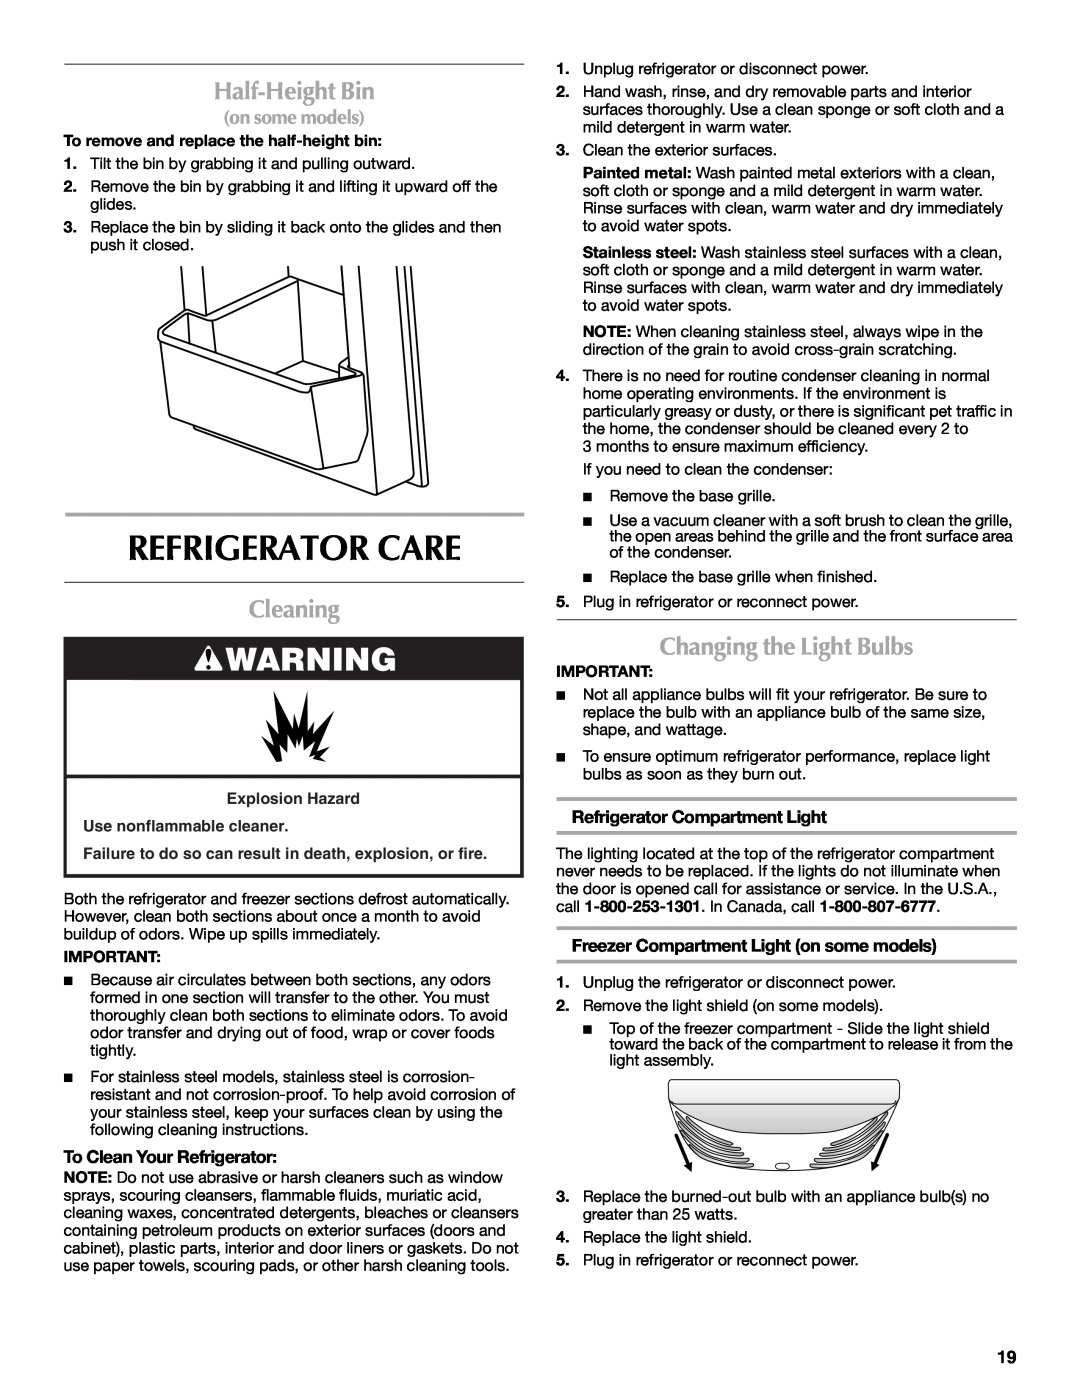 Maytag W10400978A Refrigerator Care, Half-Height Bin, Cleaning, Changing the Light Bulbs, To Clean Your Refrigerator 